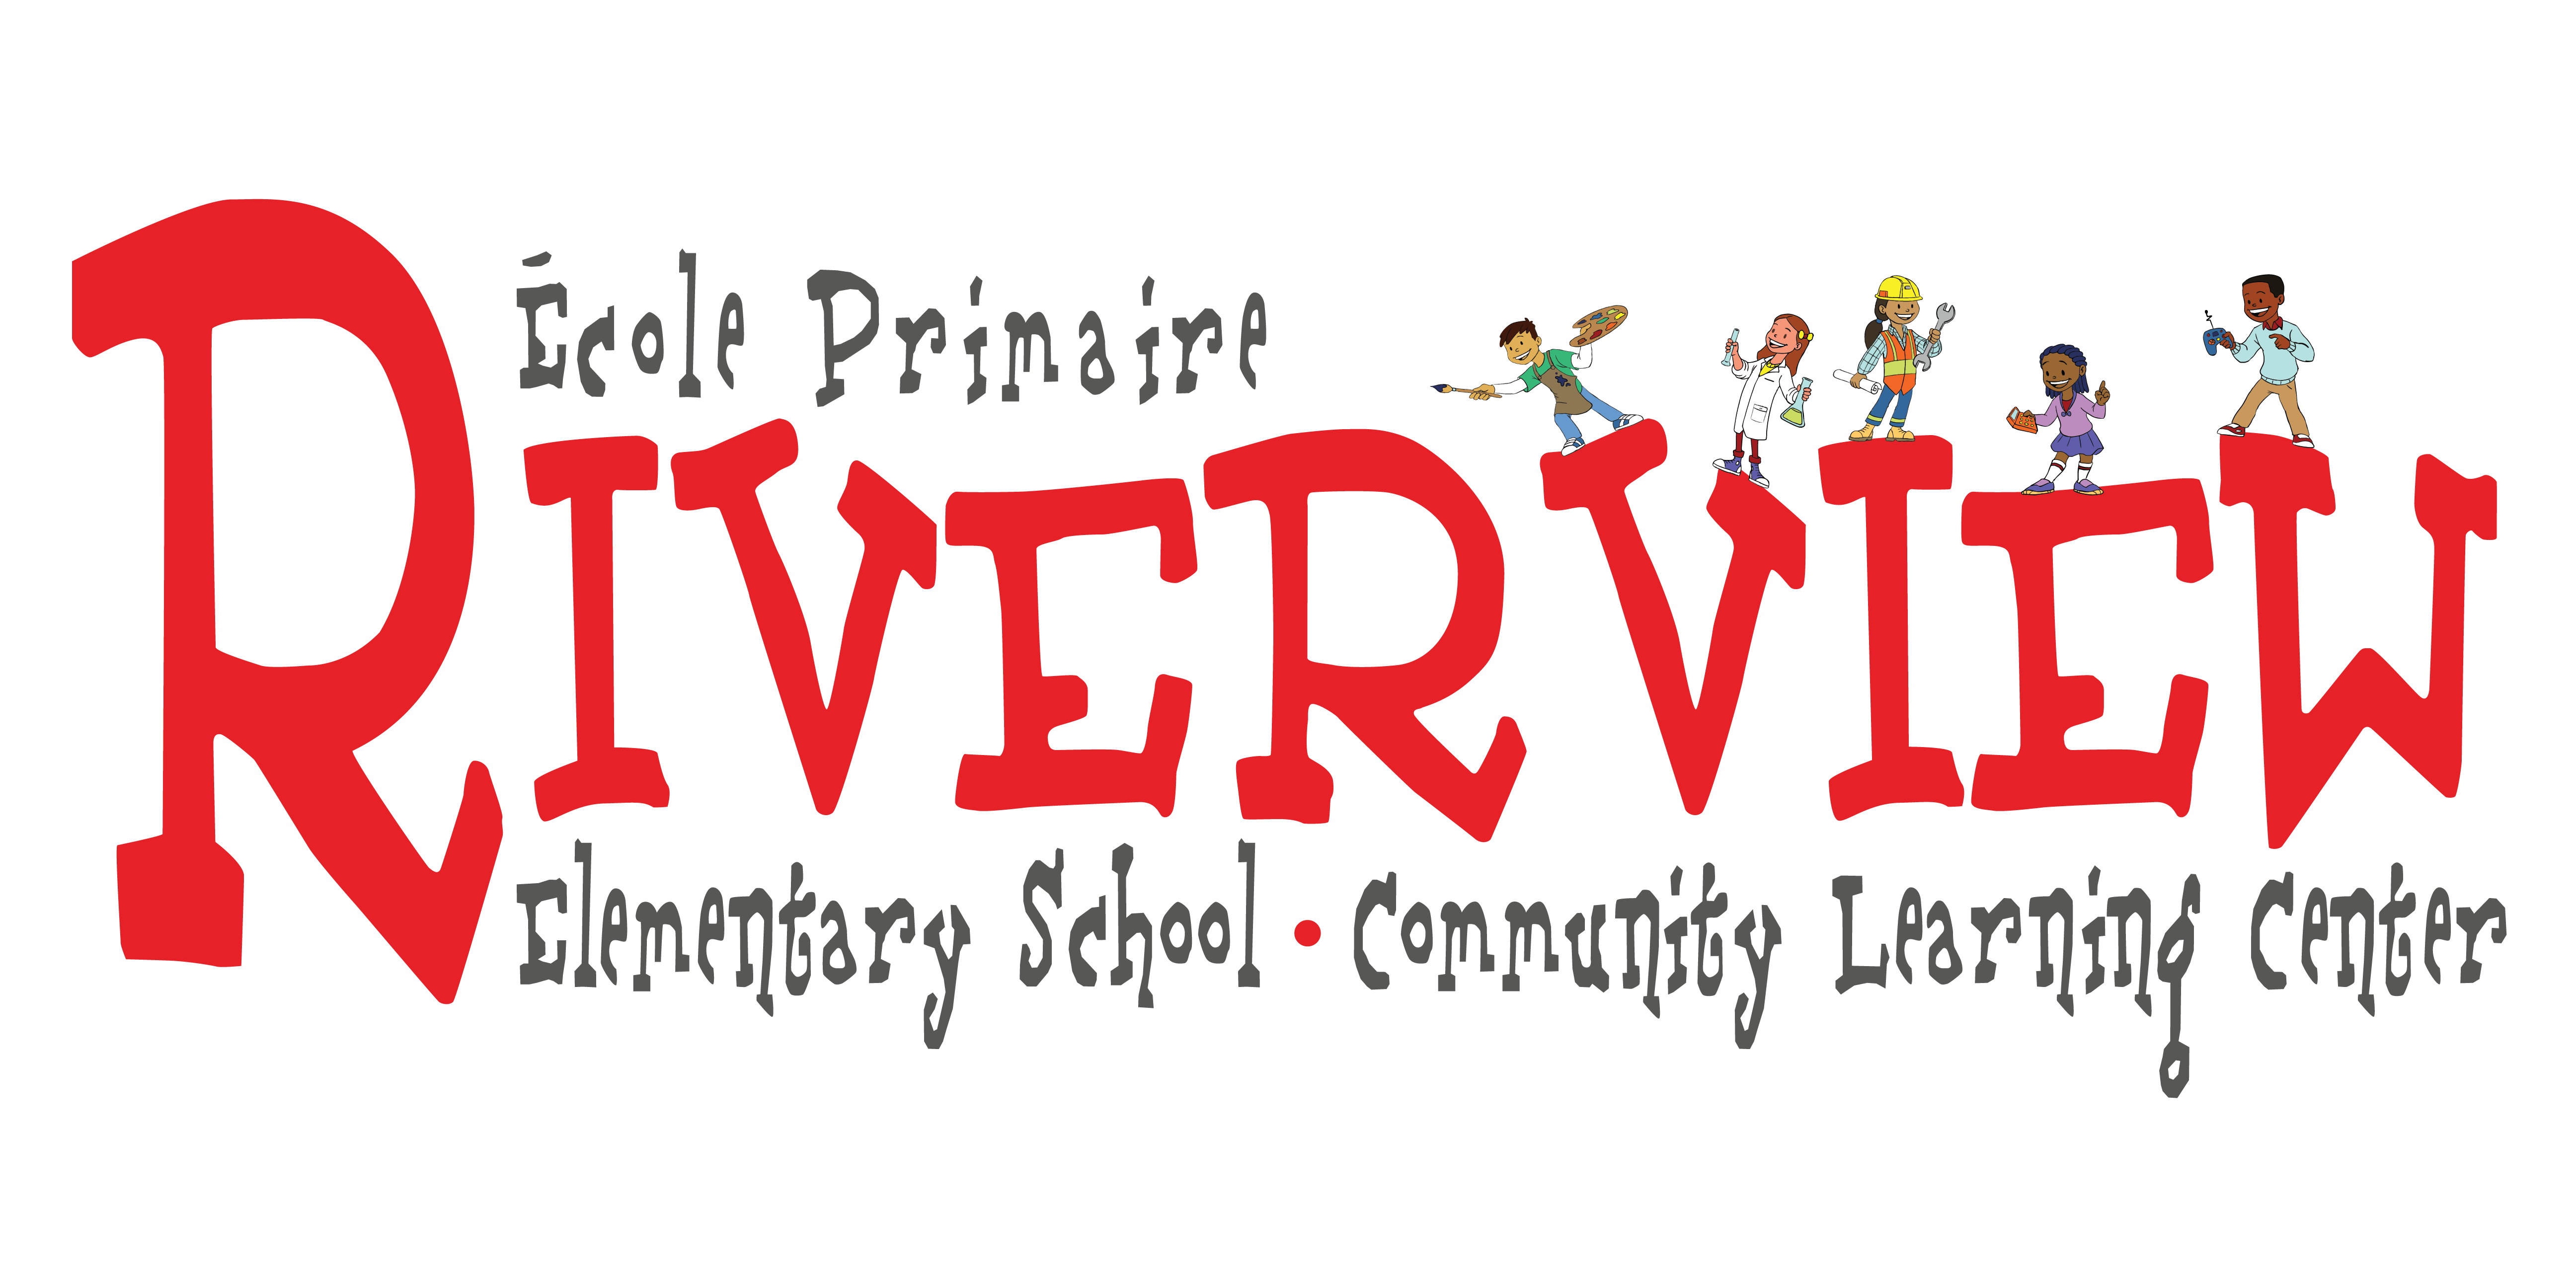 Riverview Elementary